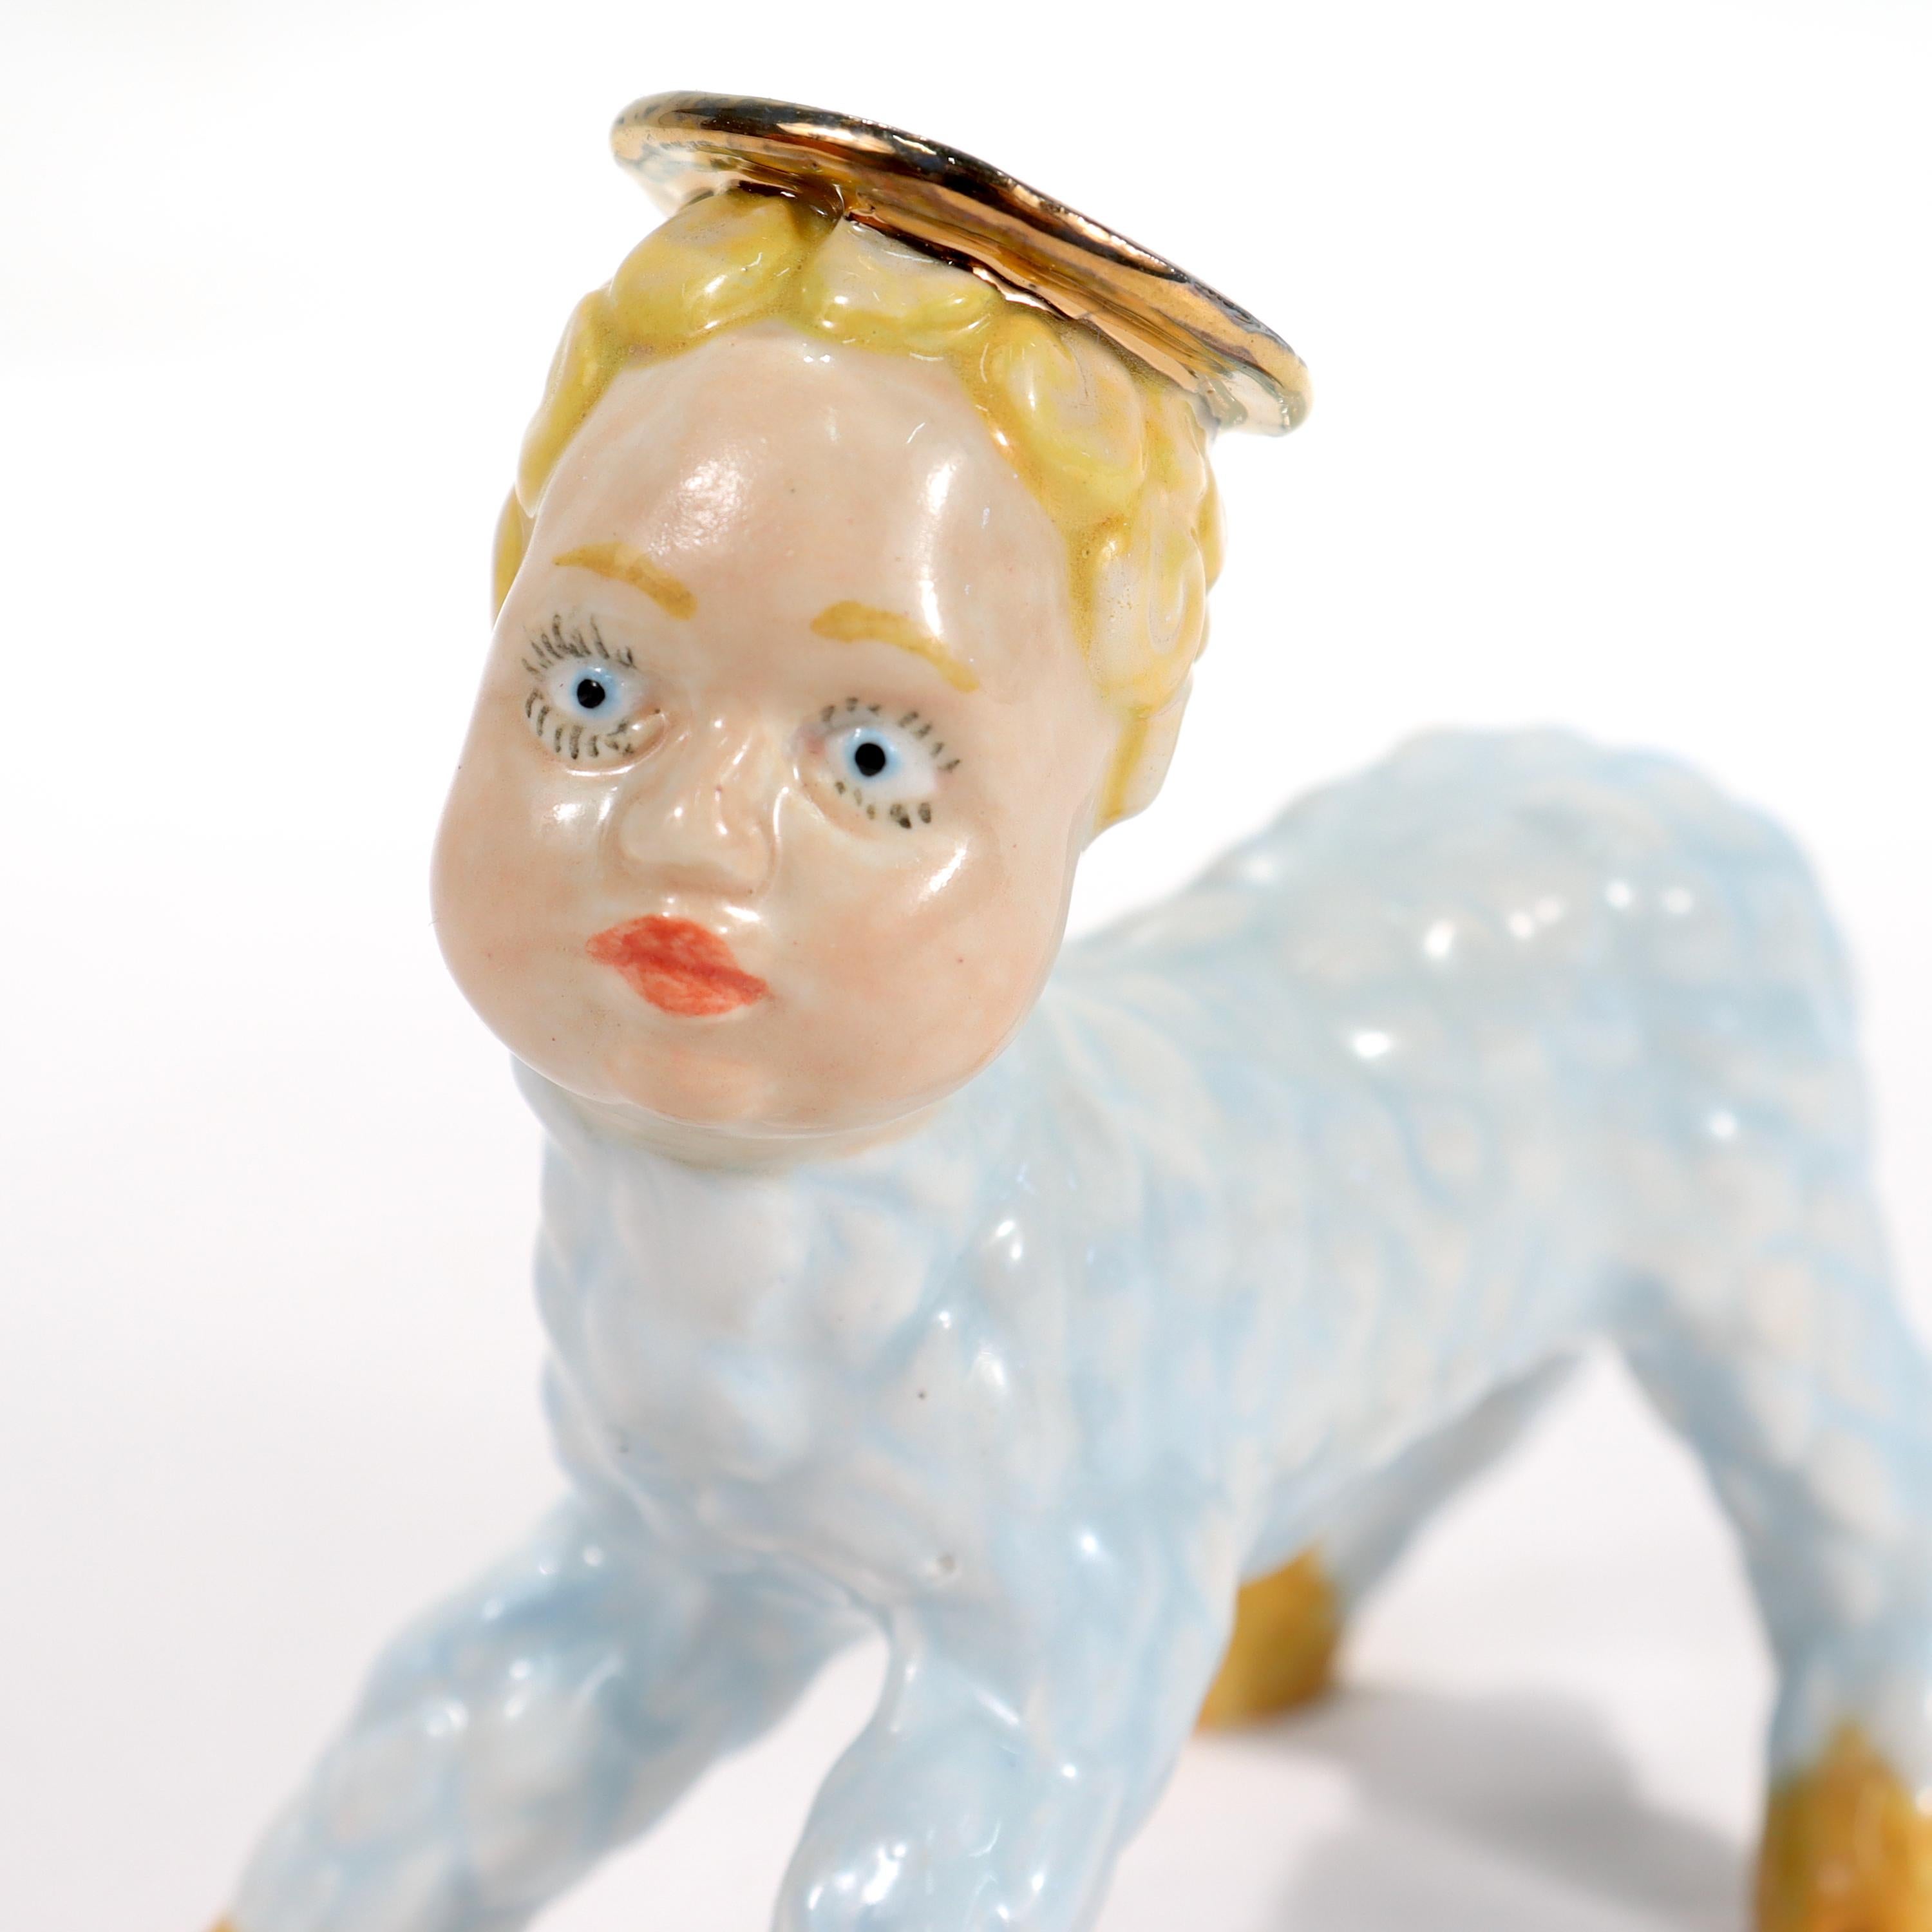 Russel Biles 'Mary Had a Little Lamb' Porcelain Figurine 2